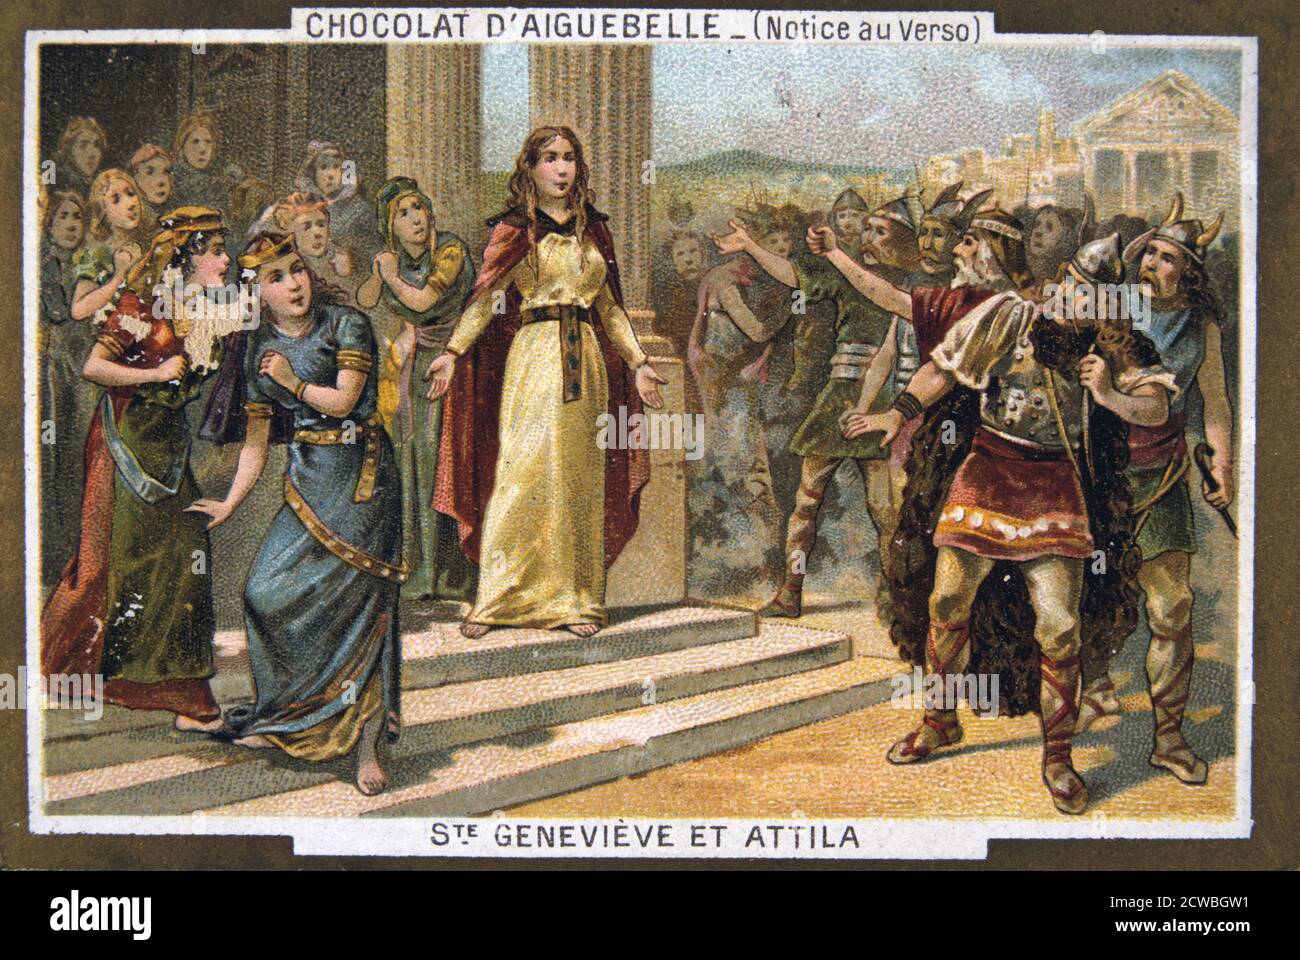 Saint Genevieve and Attila, c451 AD, (19th century). St Genevieve (419-512 AD), the patron saint of Paris, prevents Attila the Hun (406-453 AD) from attacking the city. Card from a series produced by the chocolate factory at the Monastery of Aiguebelle. Stock Photo